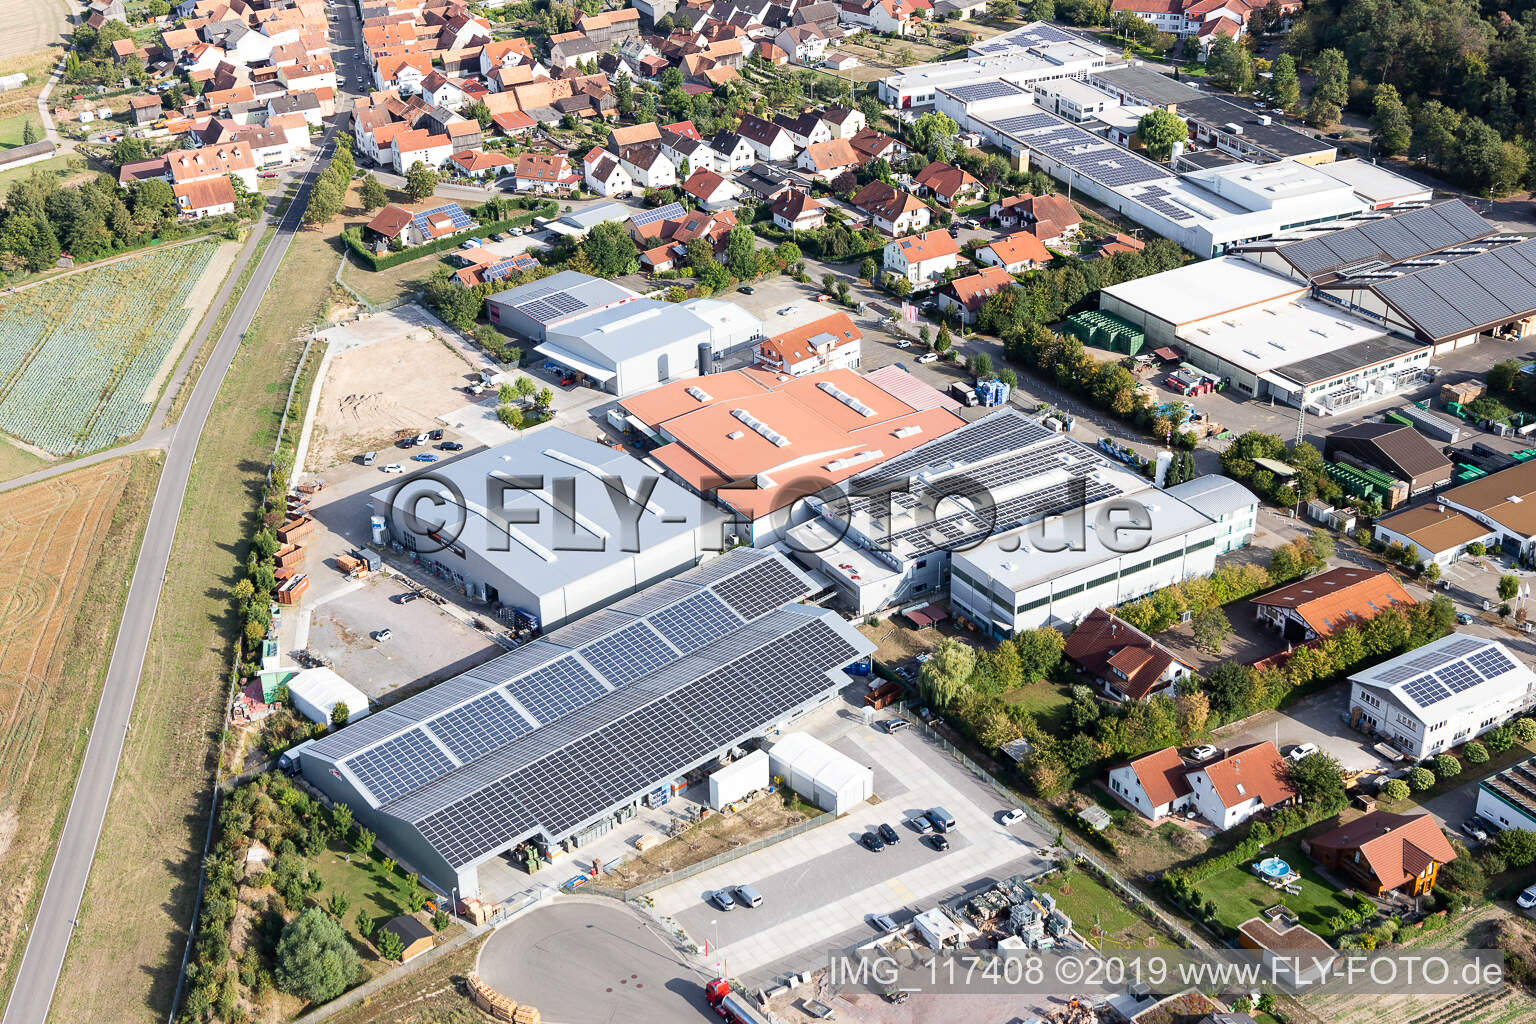 Drone image of Commercial area Im Gereut, HGGS LaserCUT GmbH & Co. KG in Hatzenbühl in the state Rhineland-Palatinate, Germany